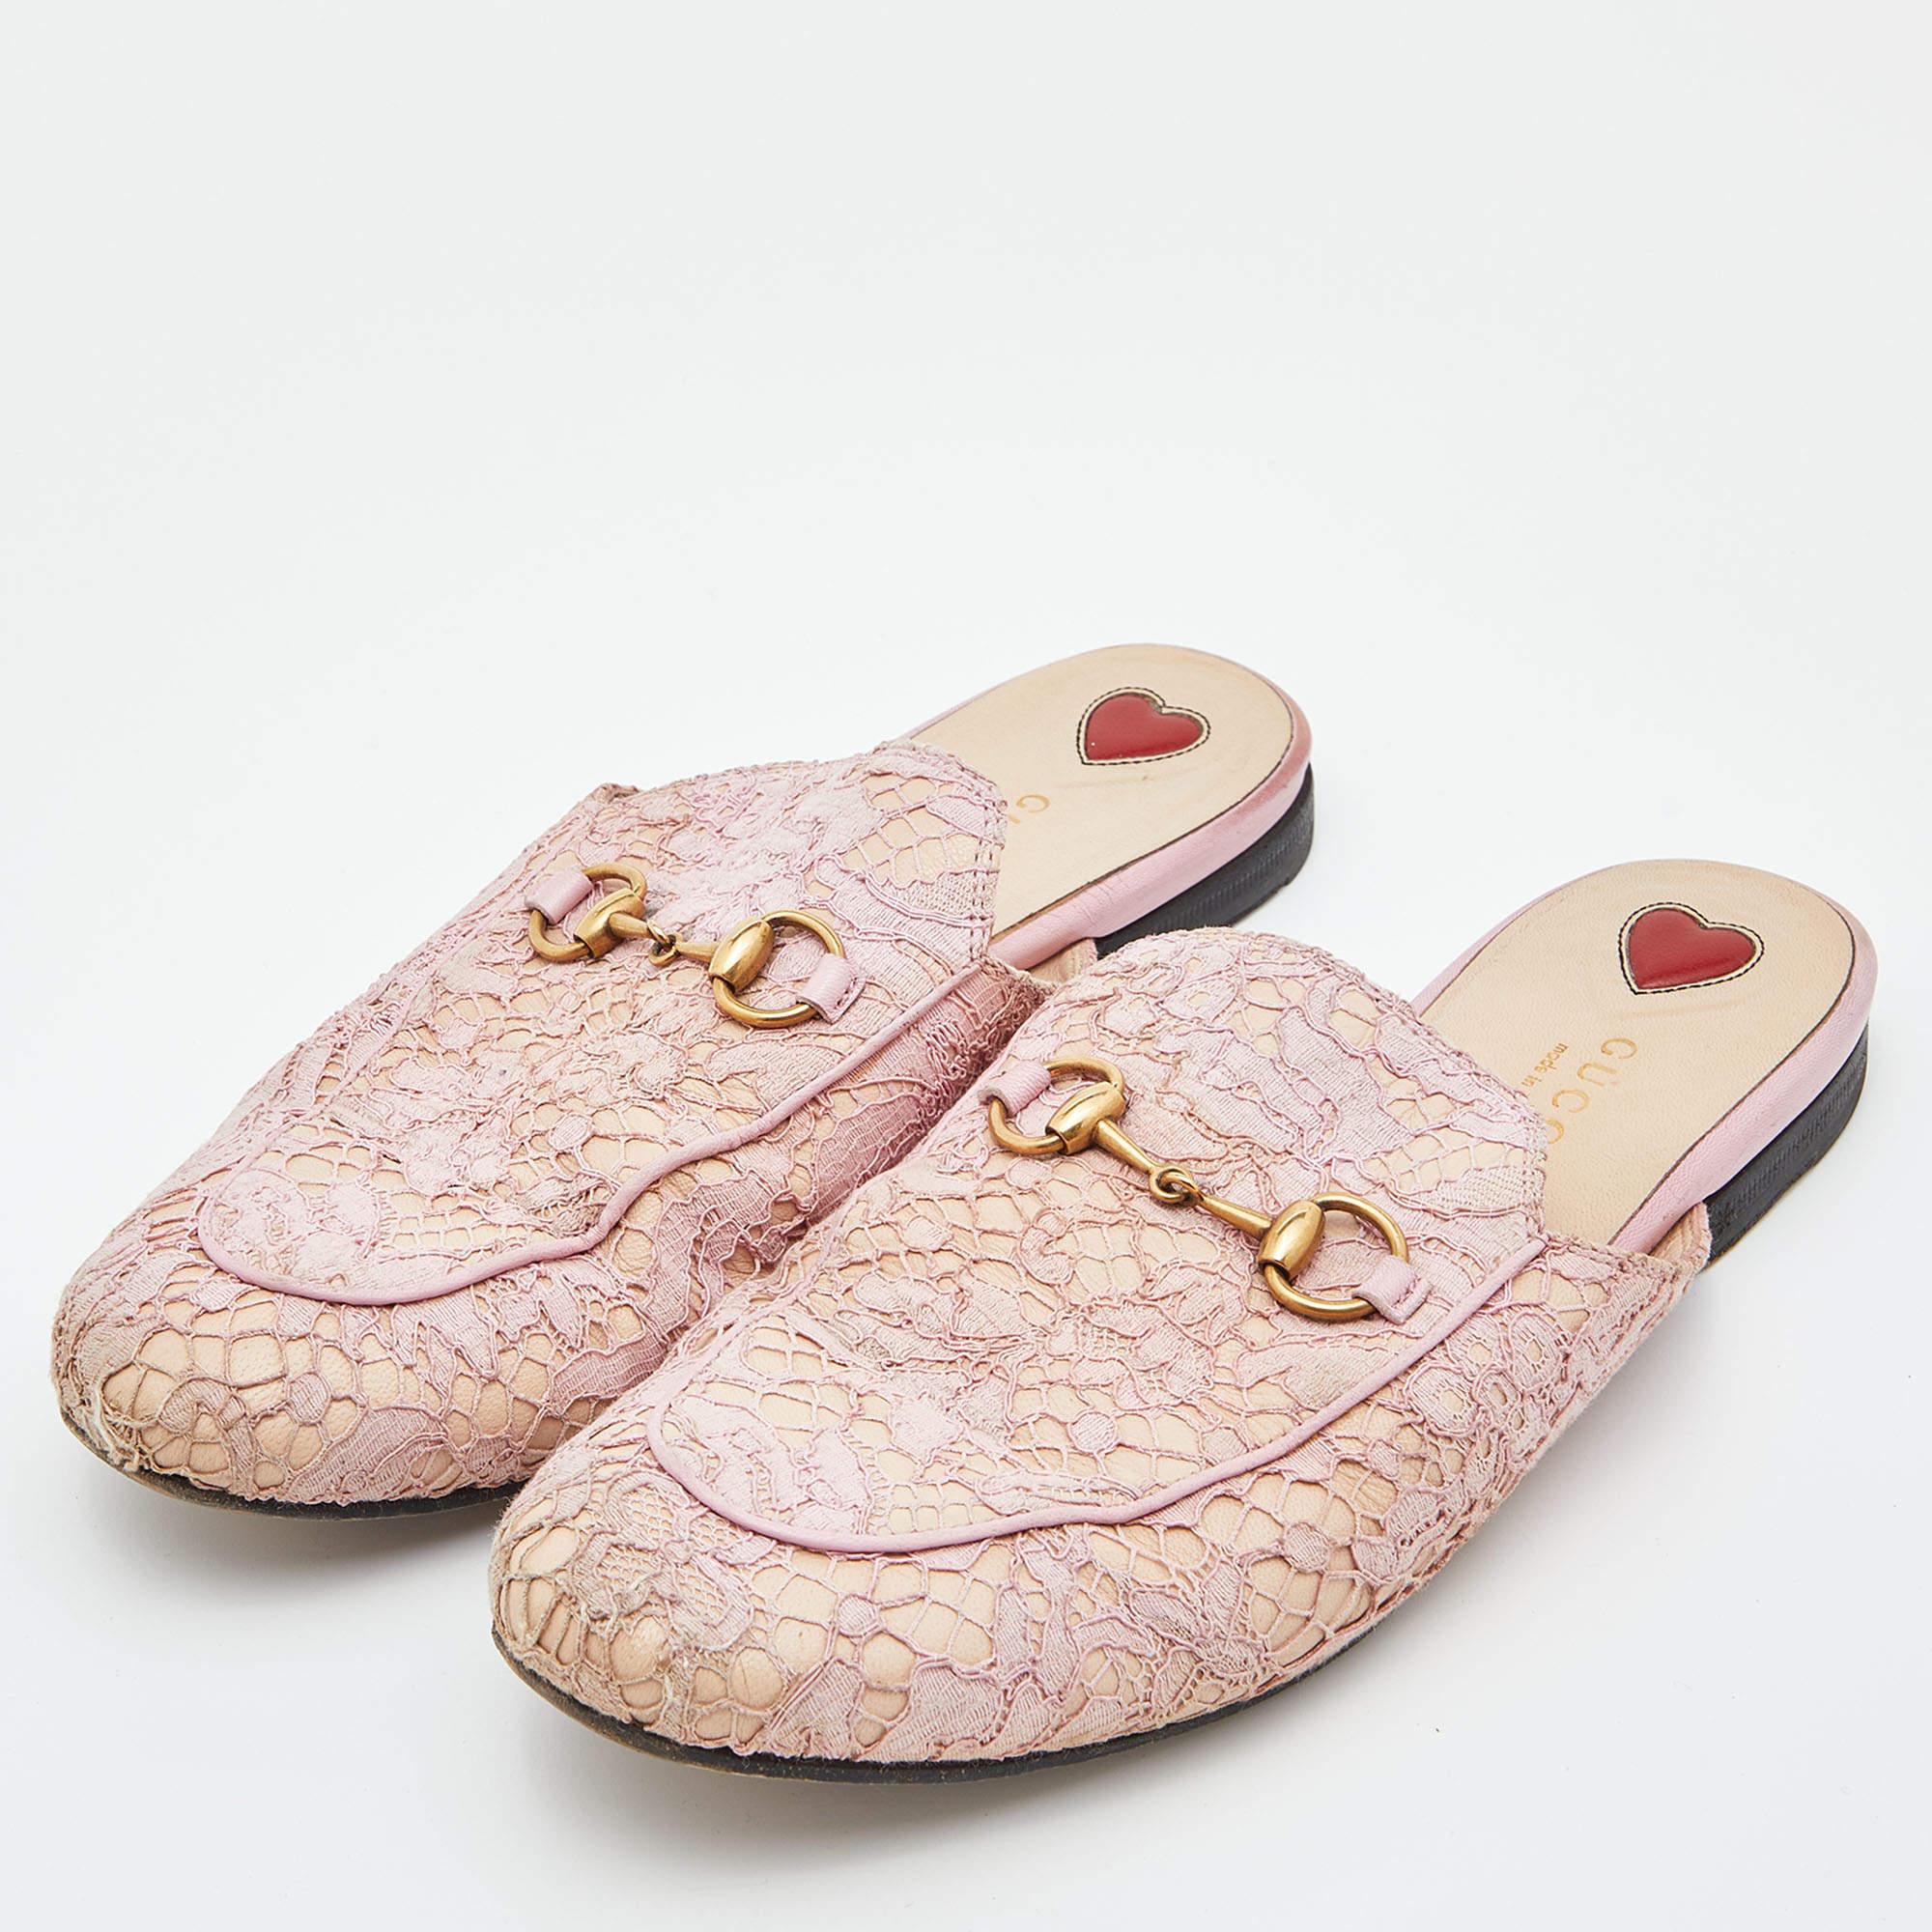 Gucci Pink Floral Lace and Leather Princetown Flat Mule Size 37.5 In Fair Condition For Sale In Dubai, Al Qouz 2